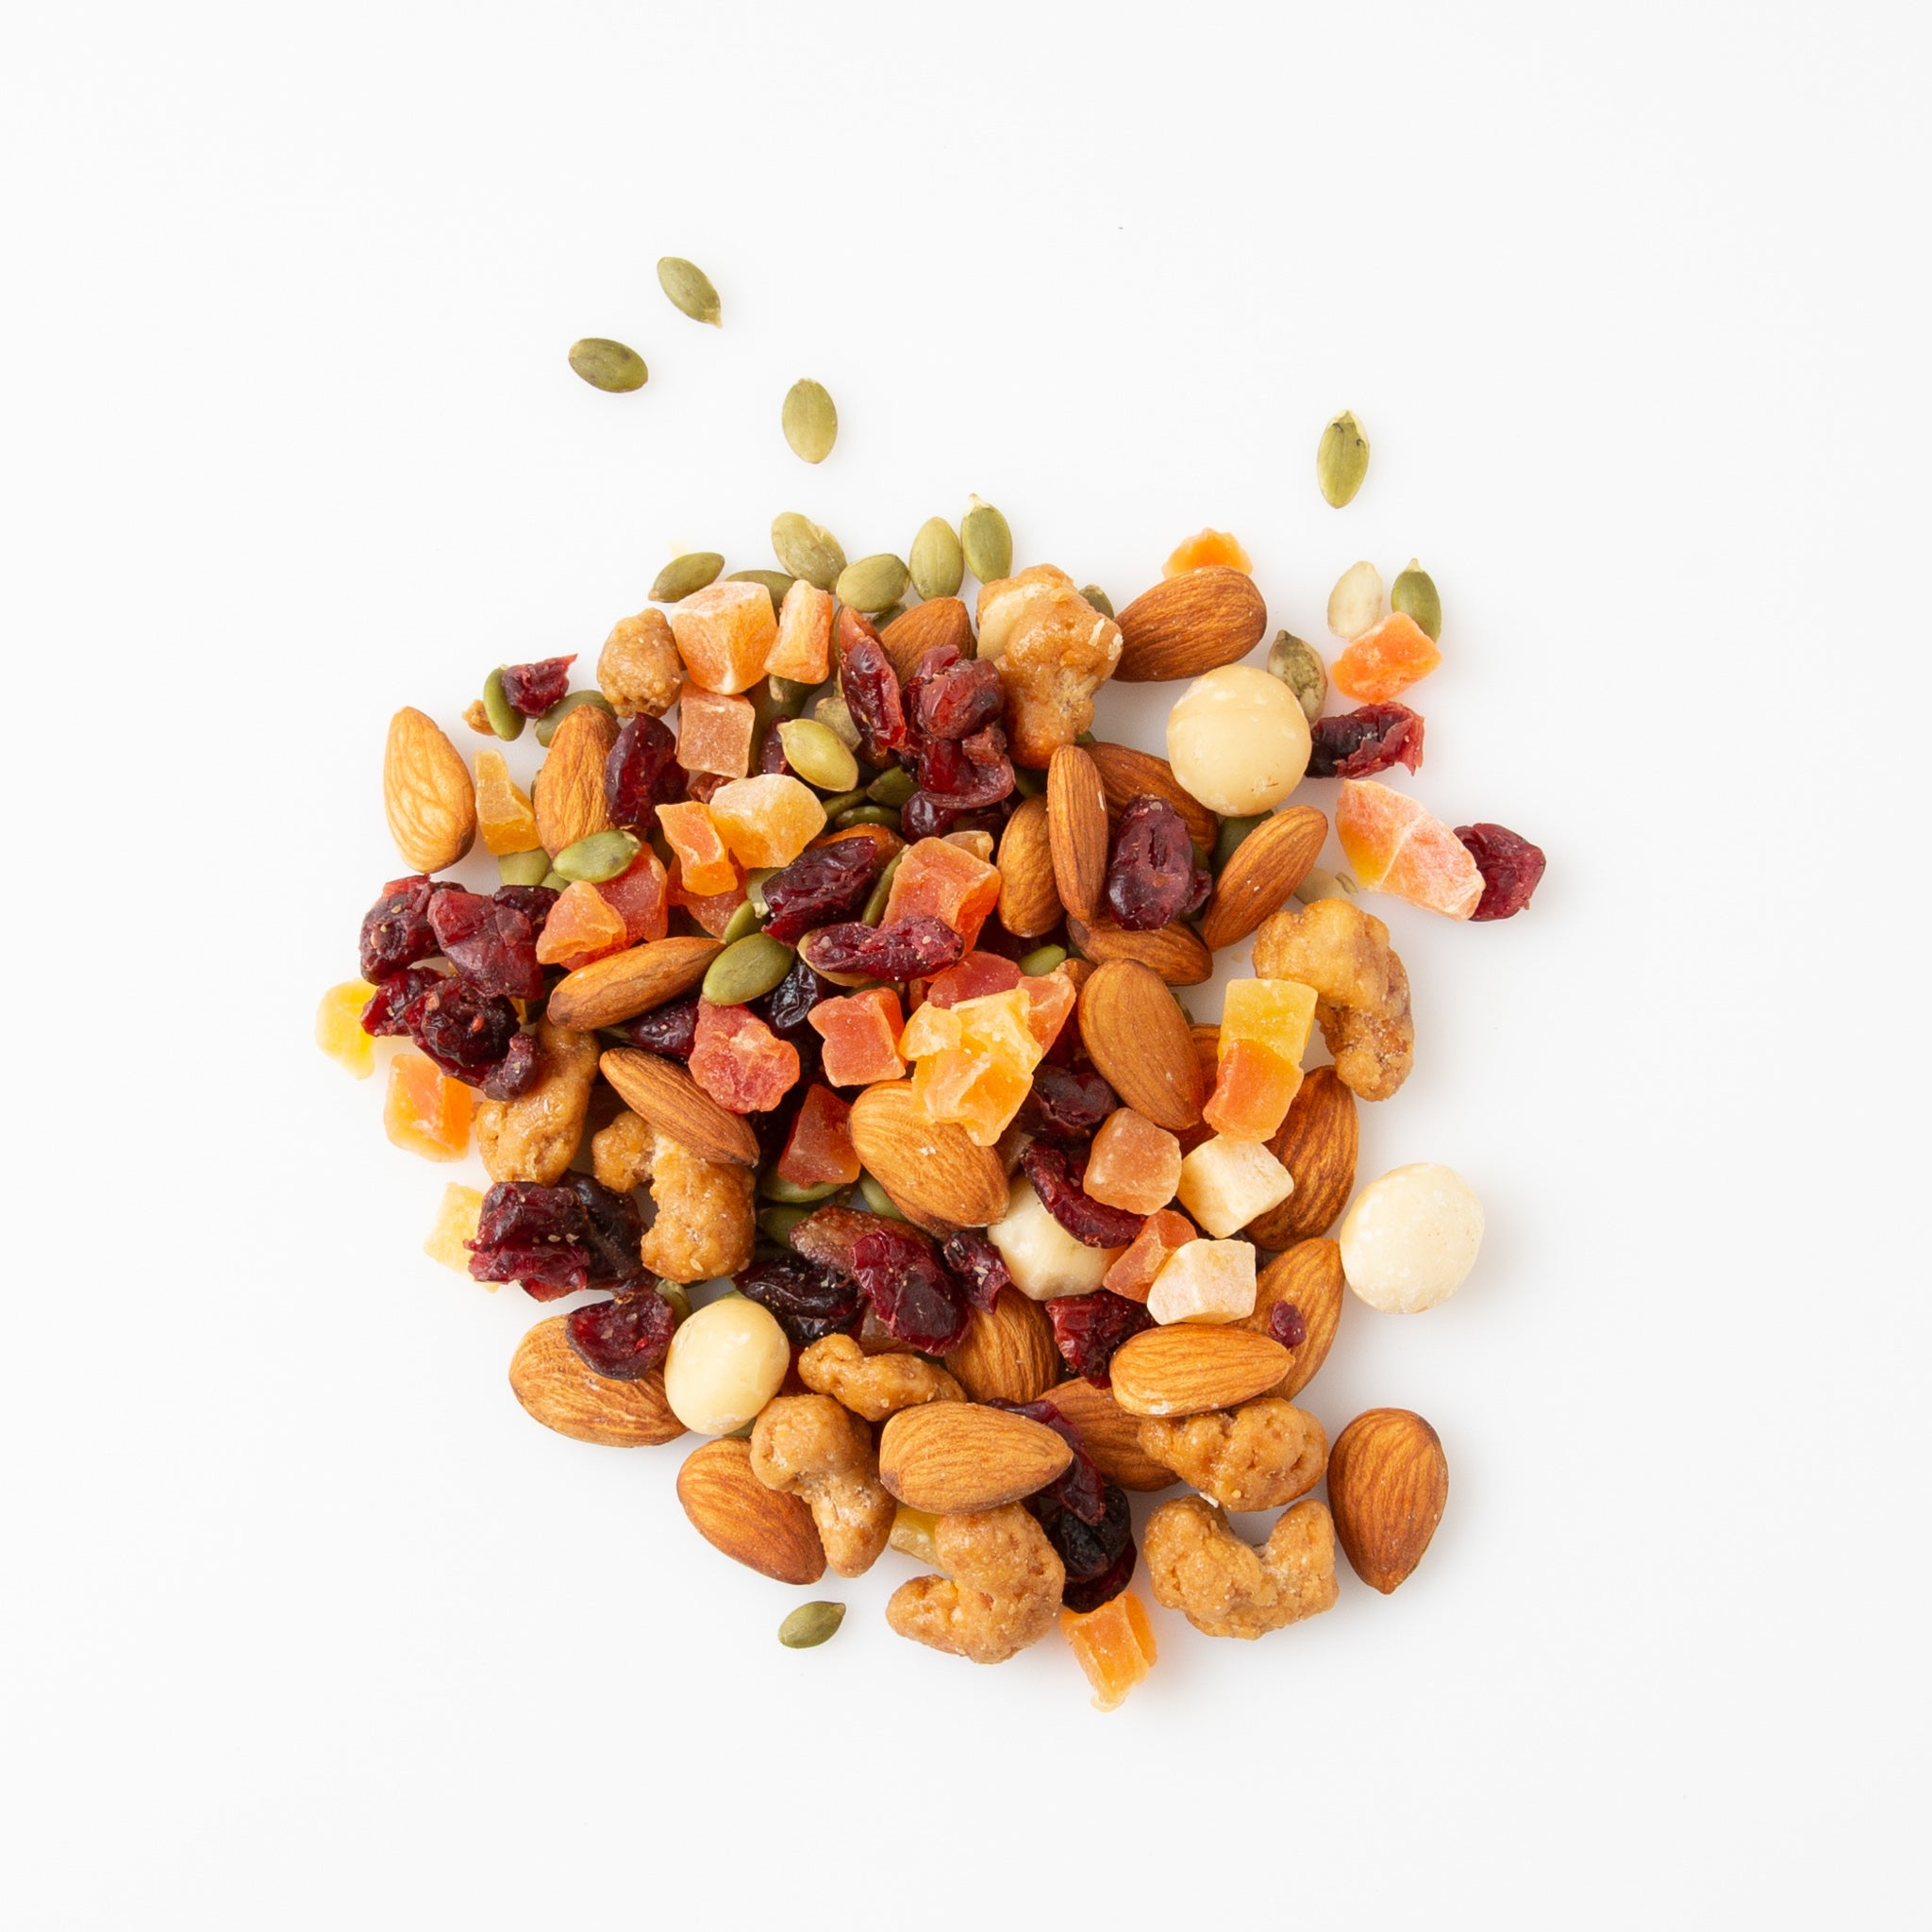 Healthy Indulgence Mixed Nuts (Raw Nuts) Image 3 - Naked Foods